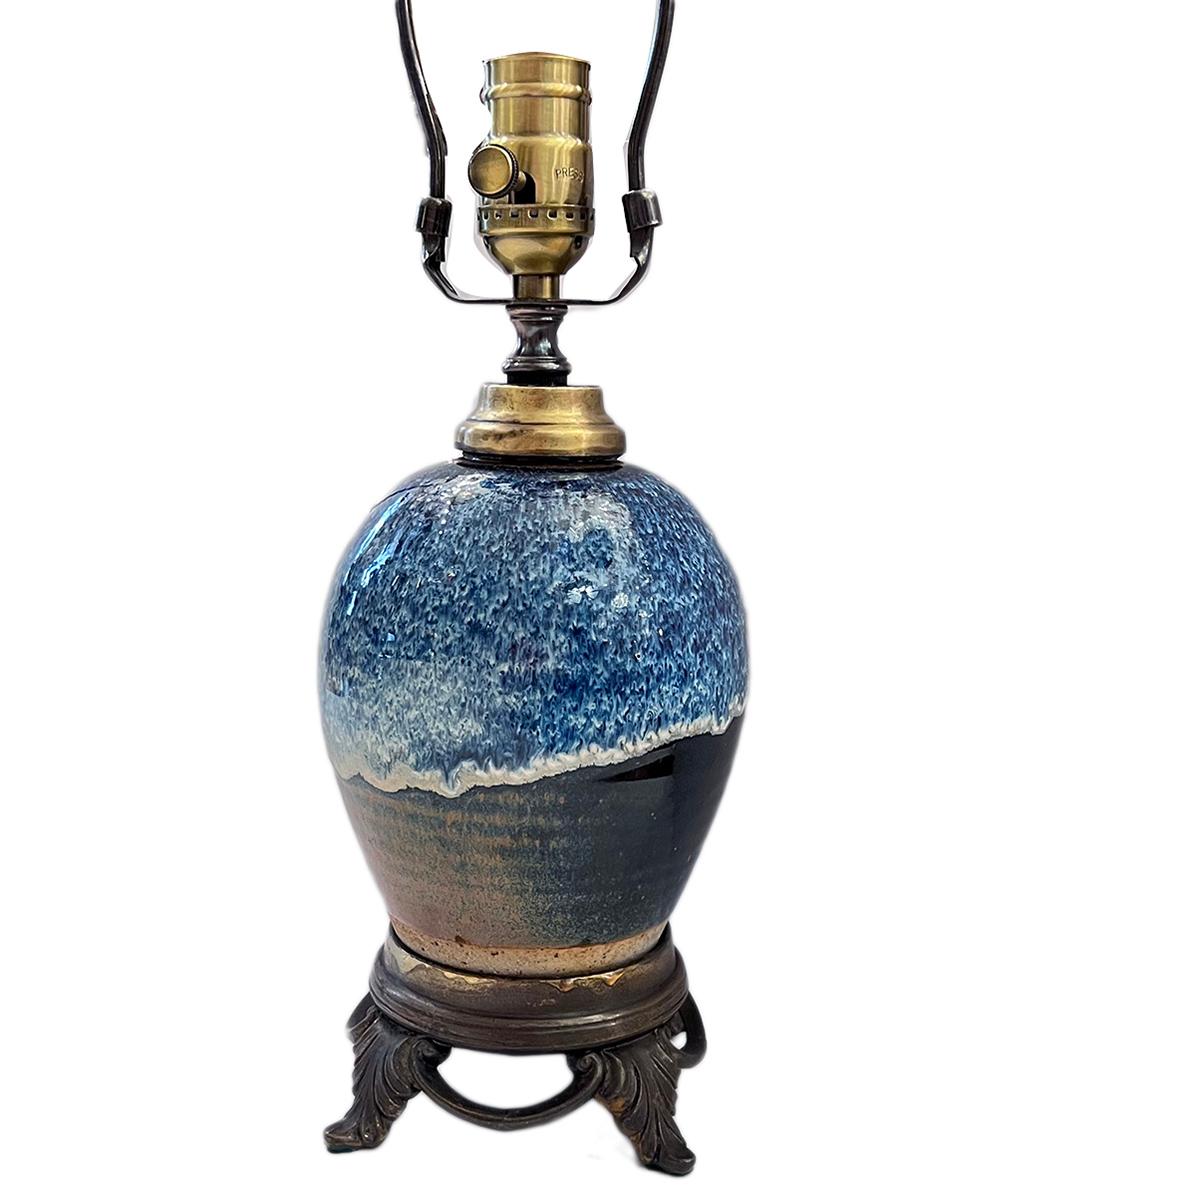 A circa 1920s French porcelain oil lamp converted to electric.

Measurements:
Height of body: 9.5